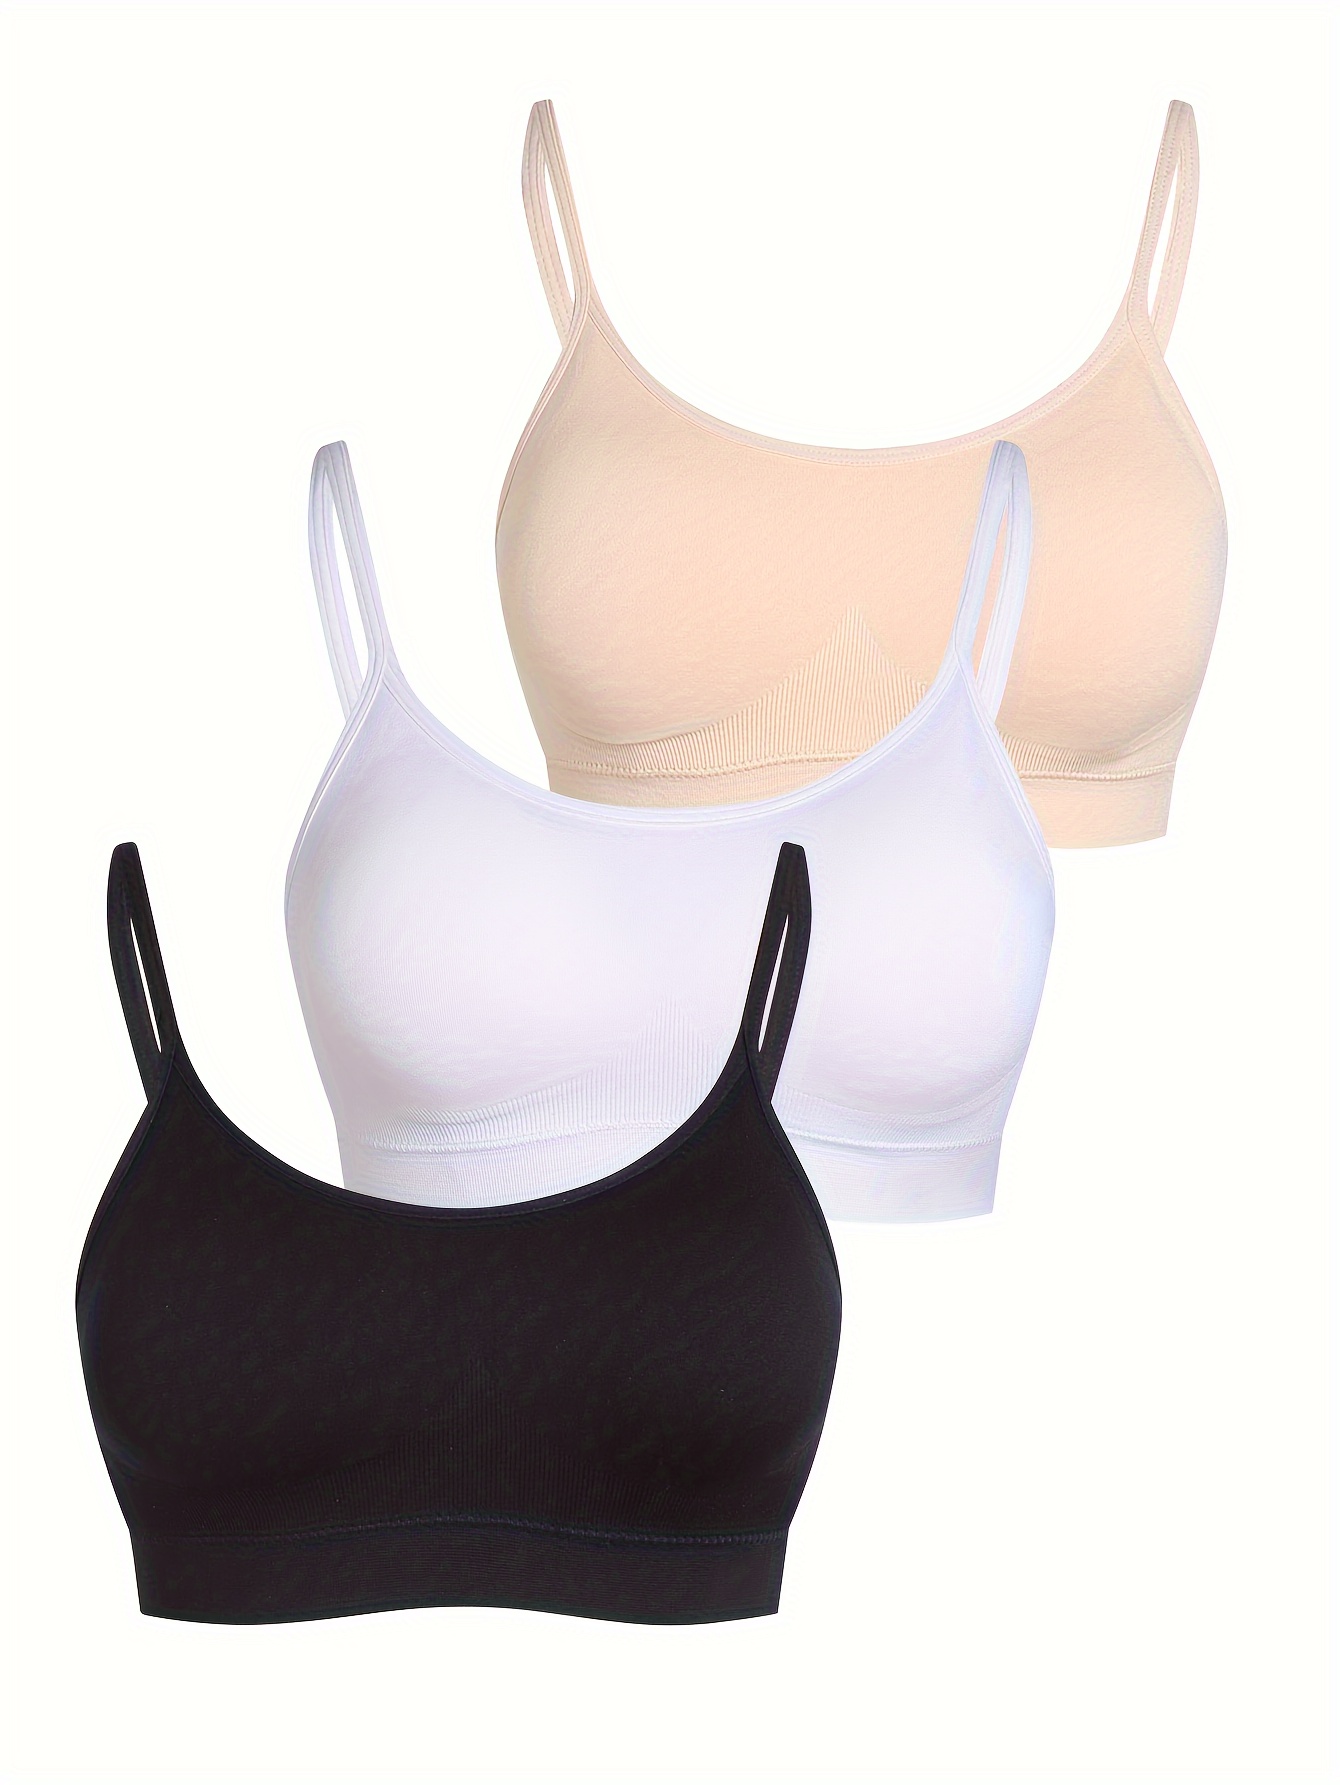 Womens Comfort Seamless Crisscross Front Strappy Bralette Sports Bra Top  with Removable Pads (1, 2 or 4 Packs)